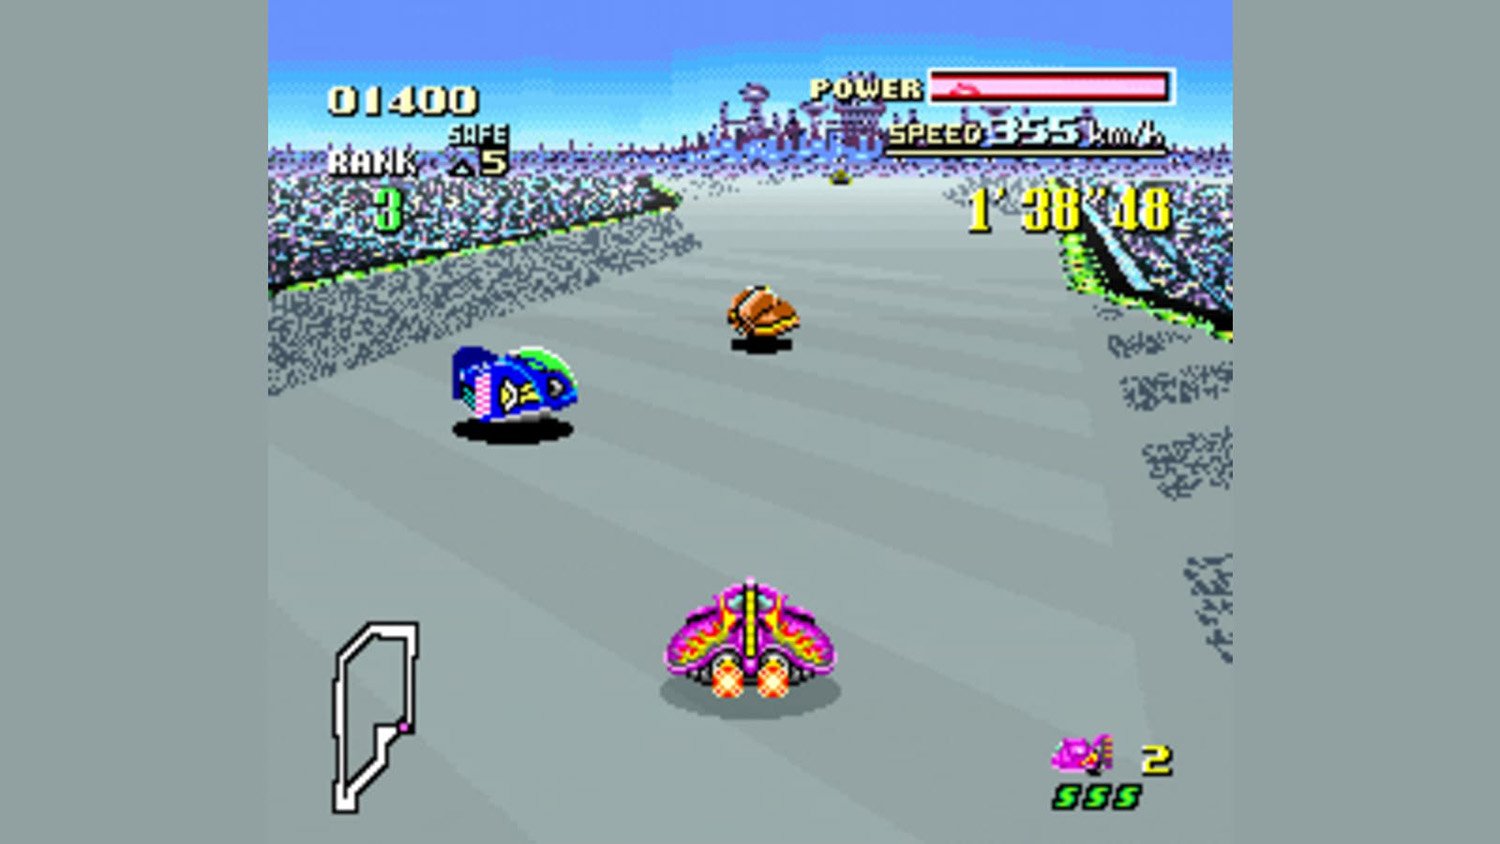 The original F-Zero game, which almost received a spinoff from Nintendo